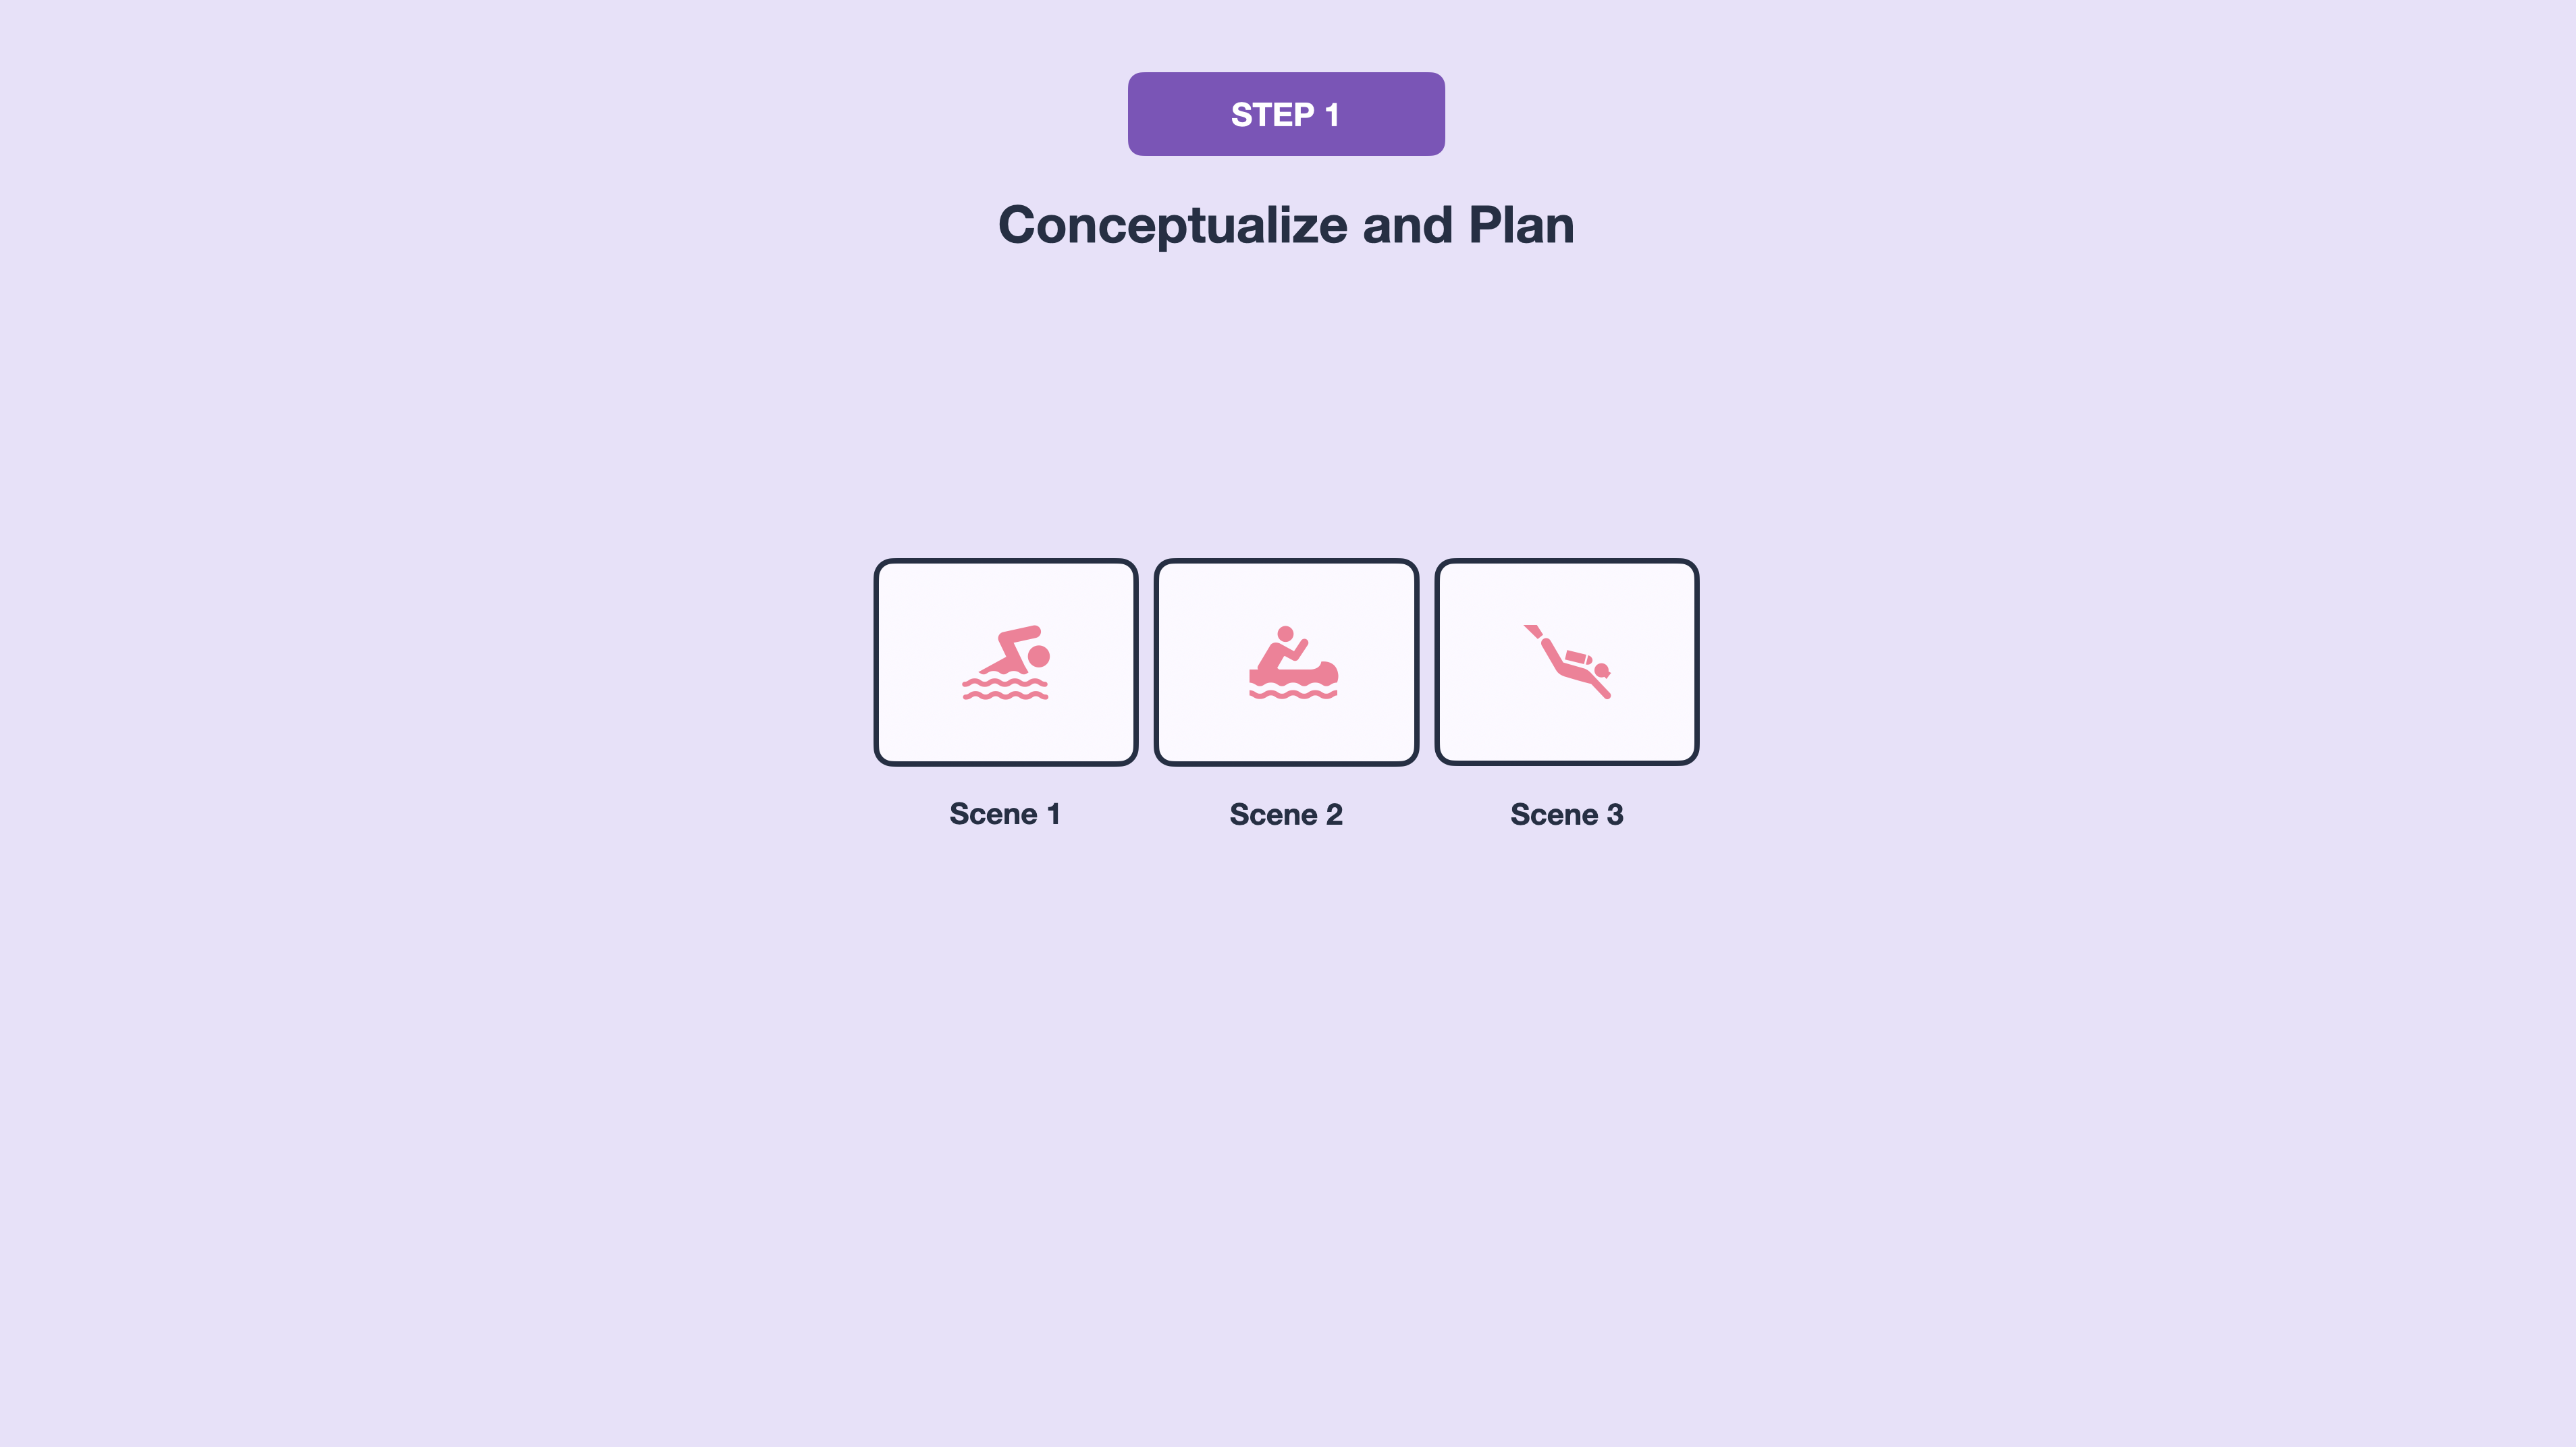 The Complete Guide to UI Animations, Micro-Interactions and Tools